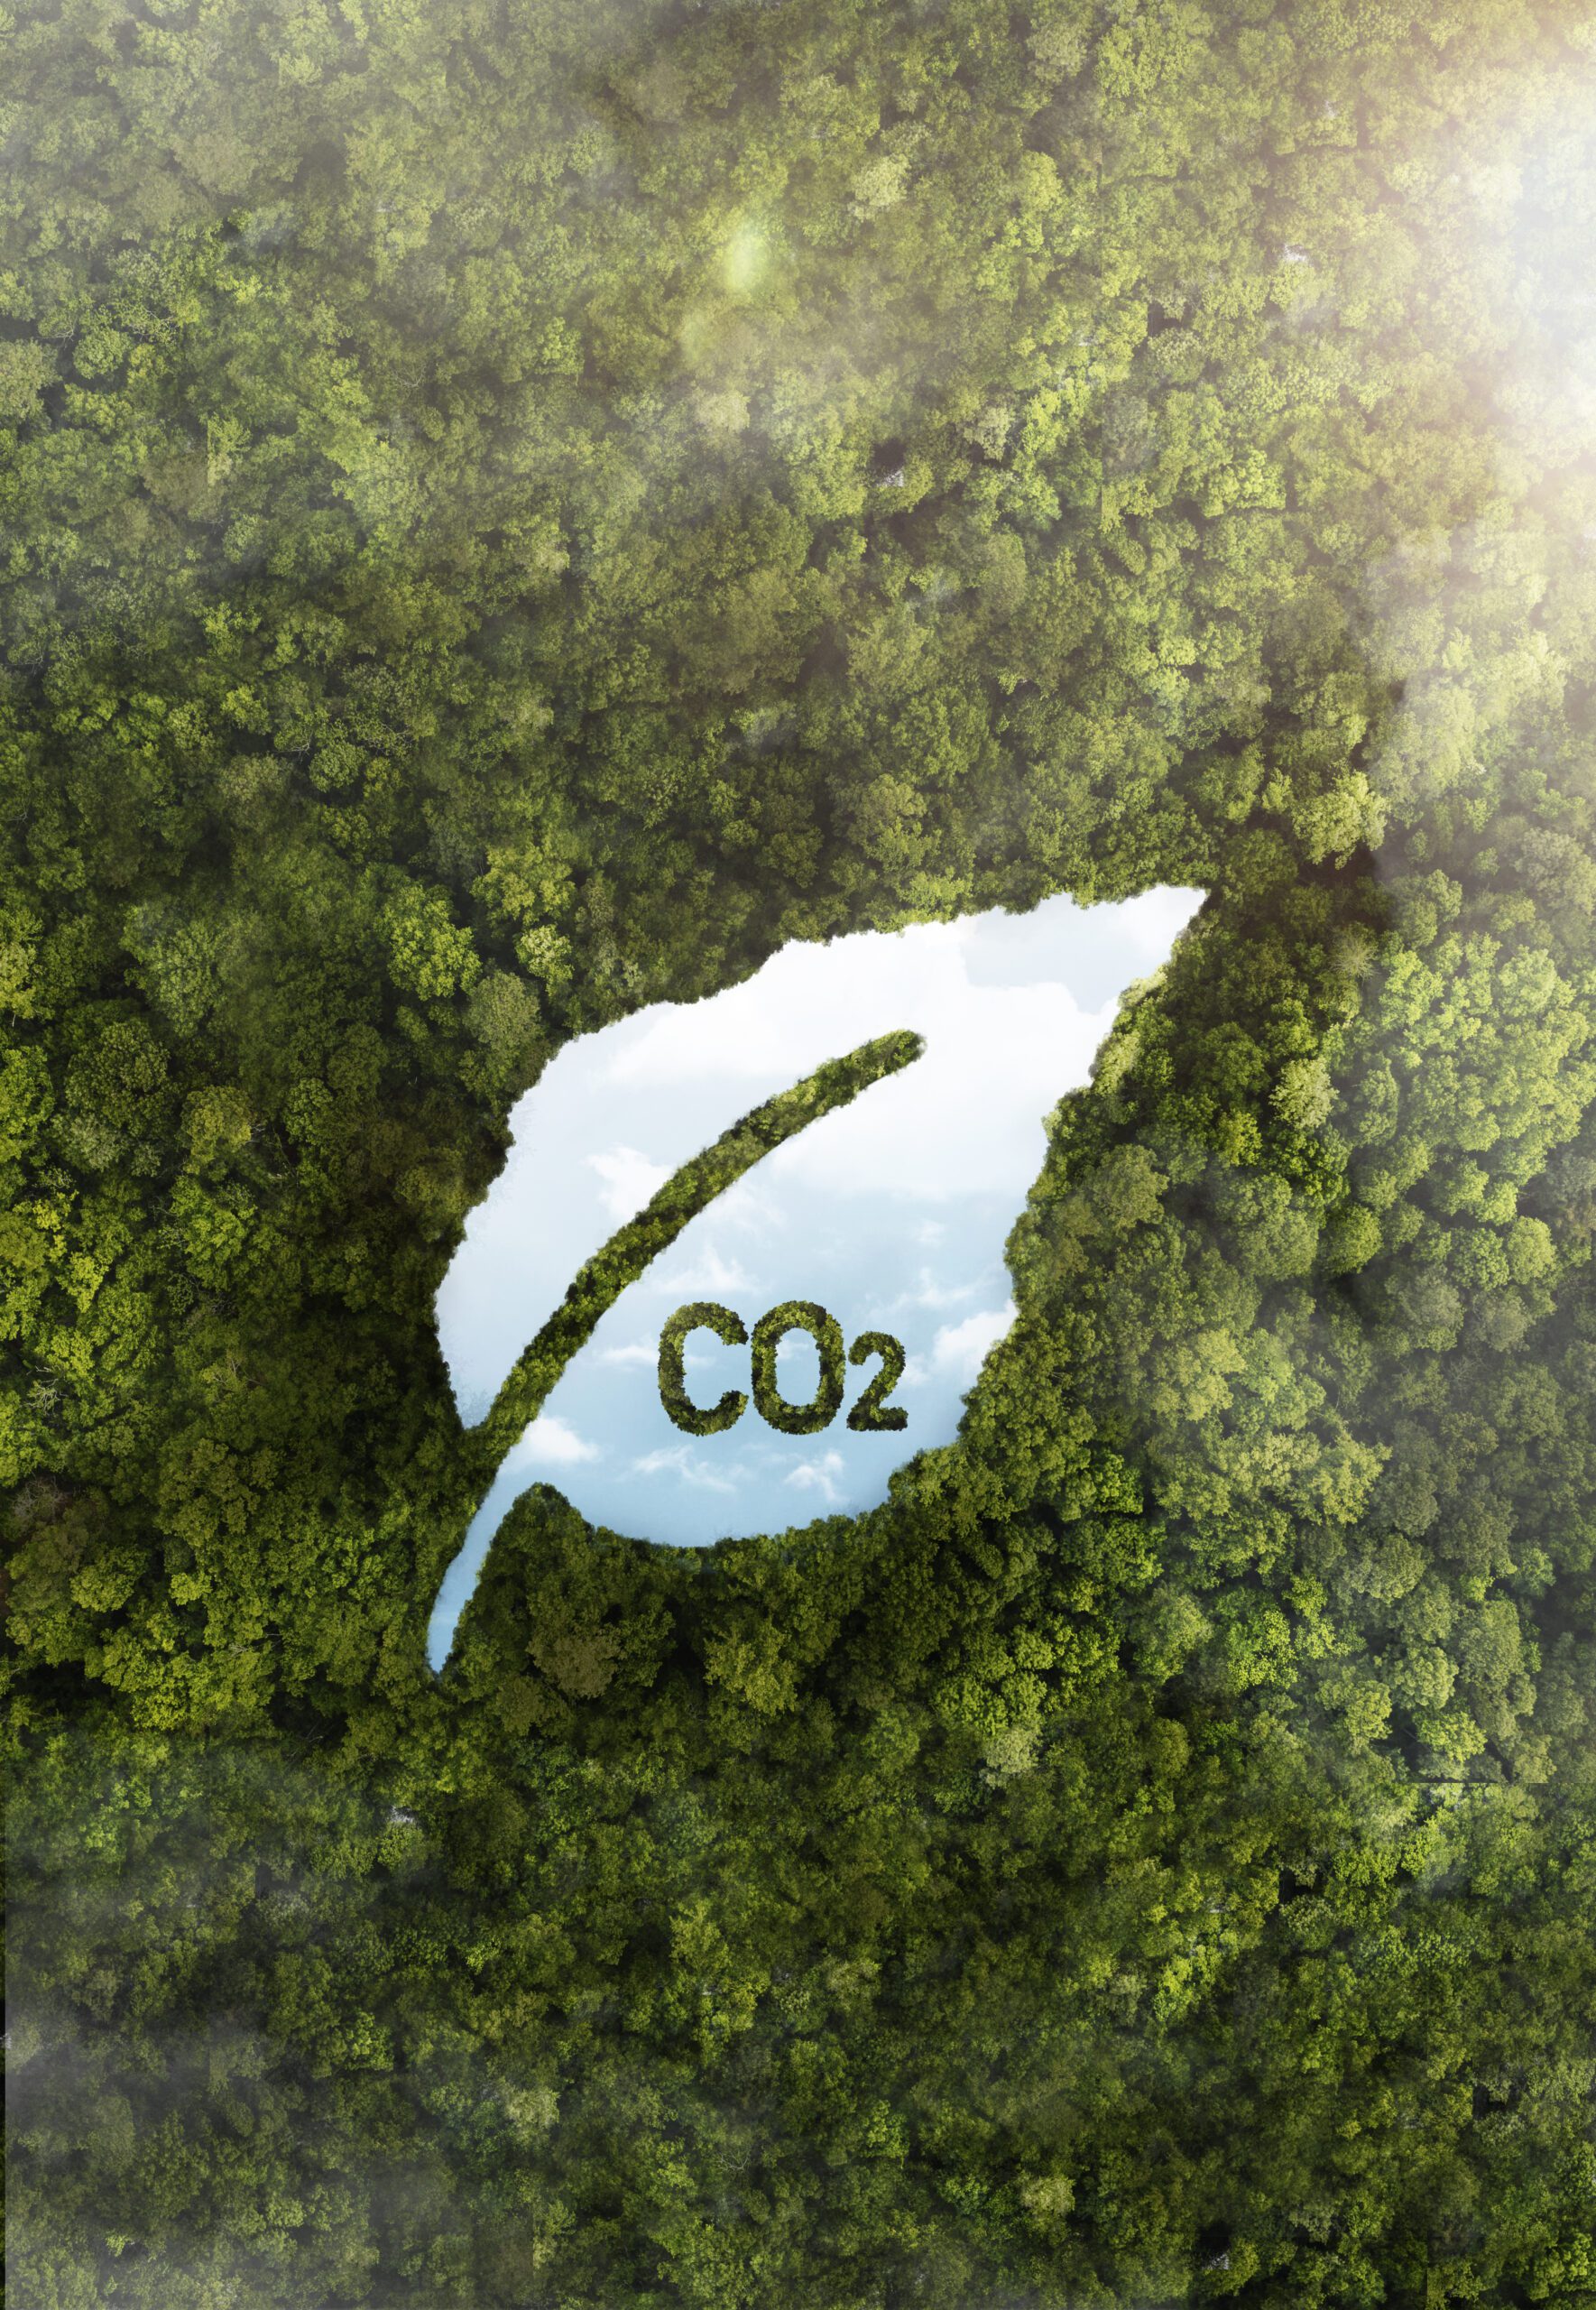 view-green-forest-trees-with-co2